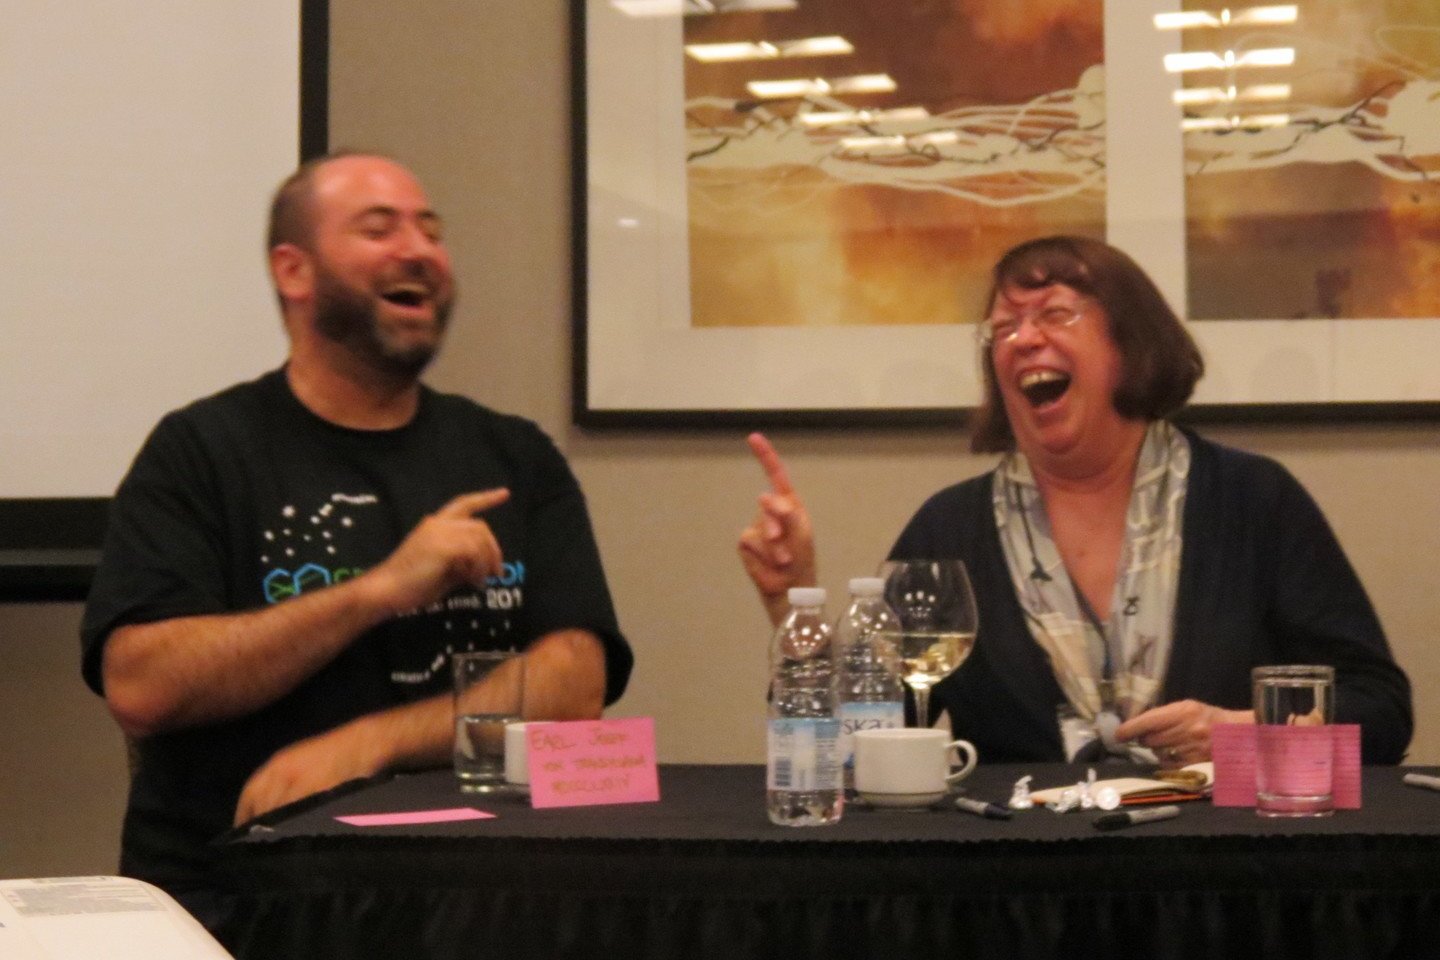 Diane and Eli laughing during a panel